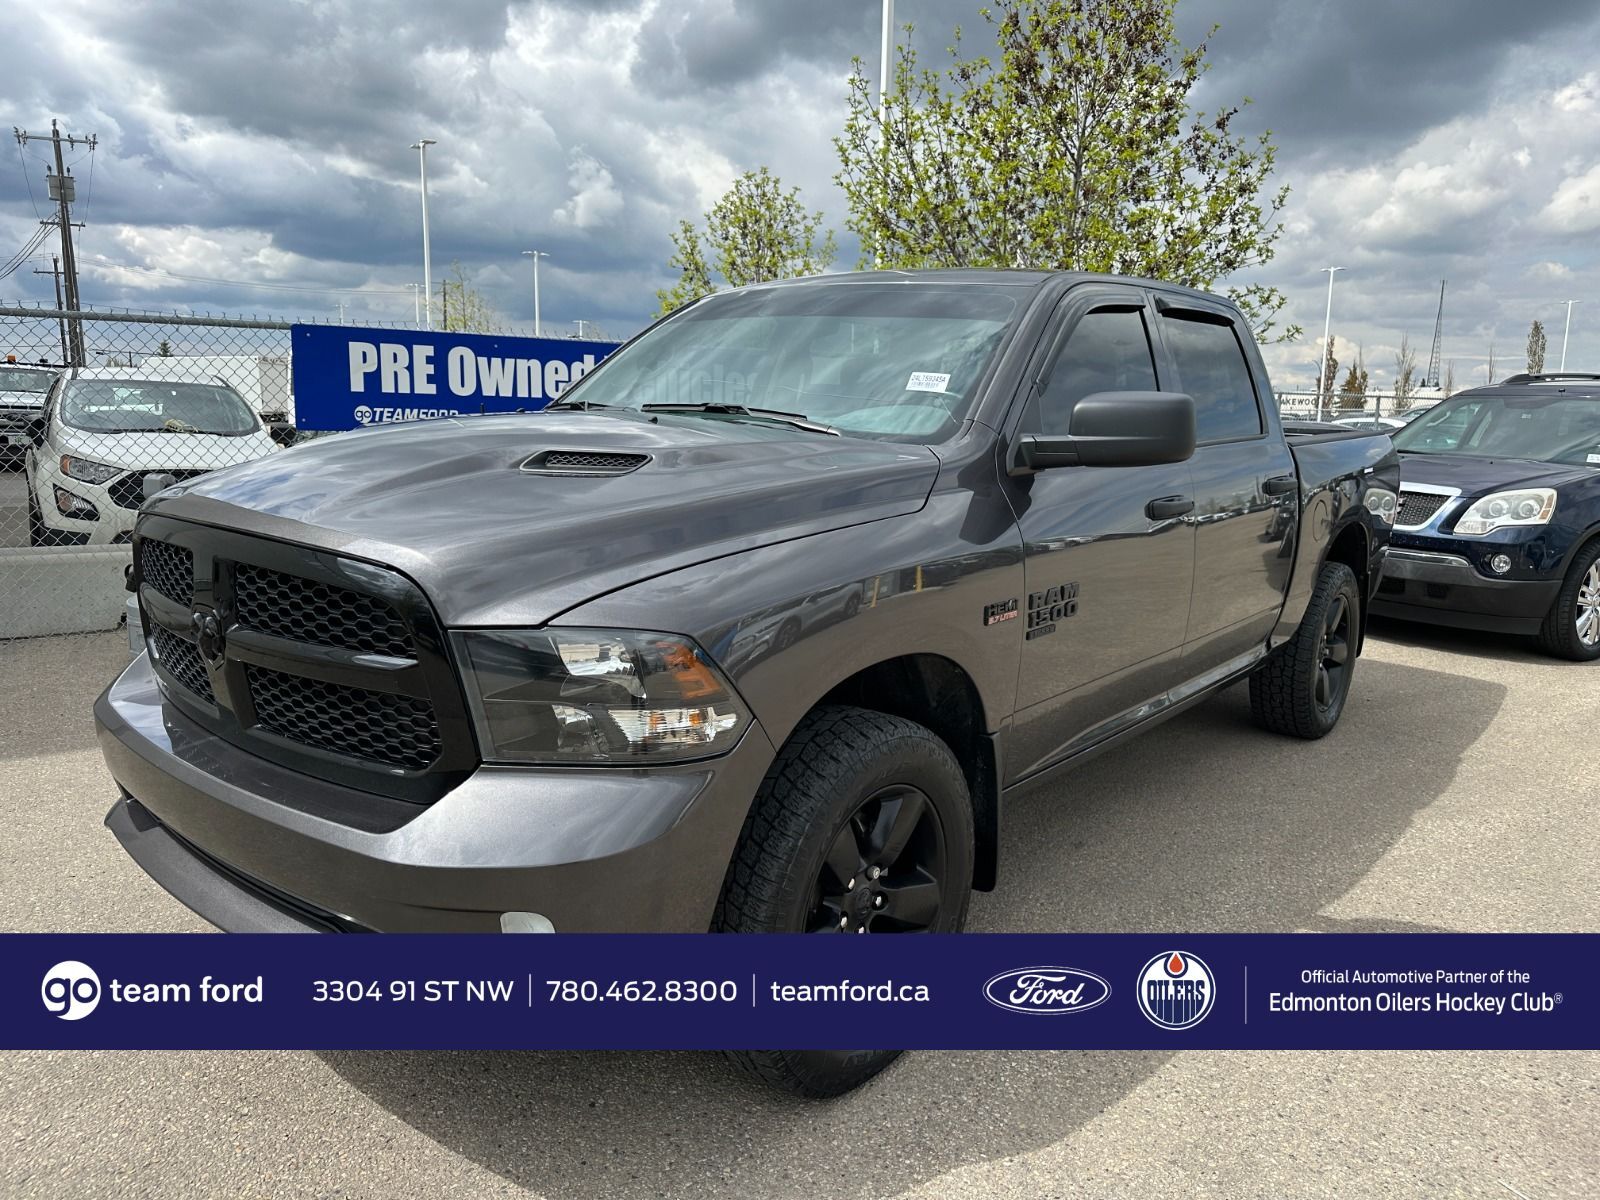 2019 Ram 1500 Classic 5.7L V8 ENG, CLASSIC EXPRESS, HEATED SEATS, REMOTE